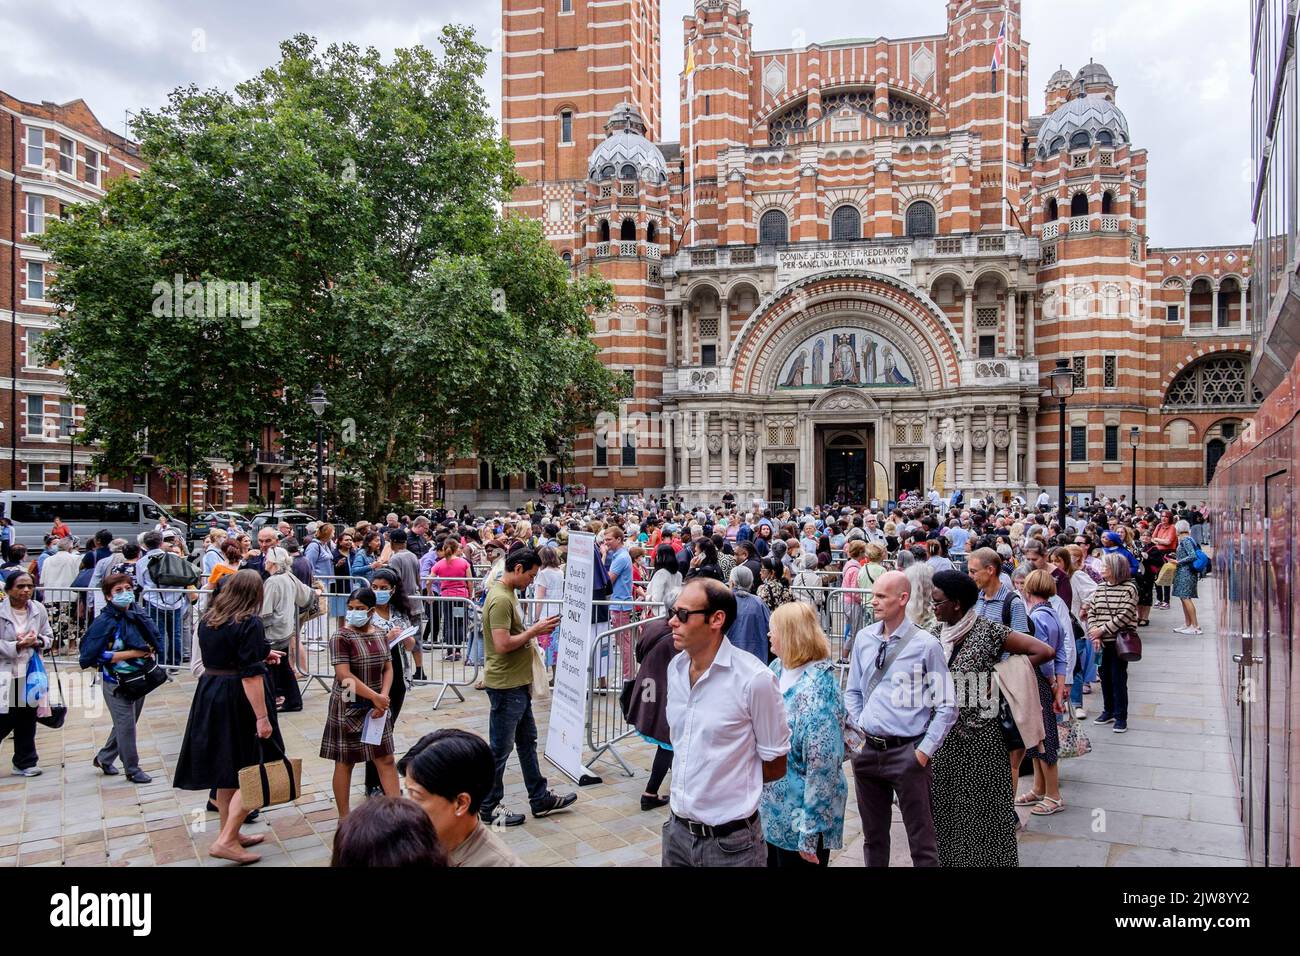 London, UK. 3rd September 2022, Religious devotees queue outside Westminster Cathedral to view the relics of St. Bernadette for the first time in the UK during a tour of England, Scotland and Wales throughout September and October 2022. Stock Photo